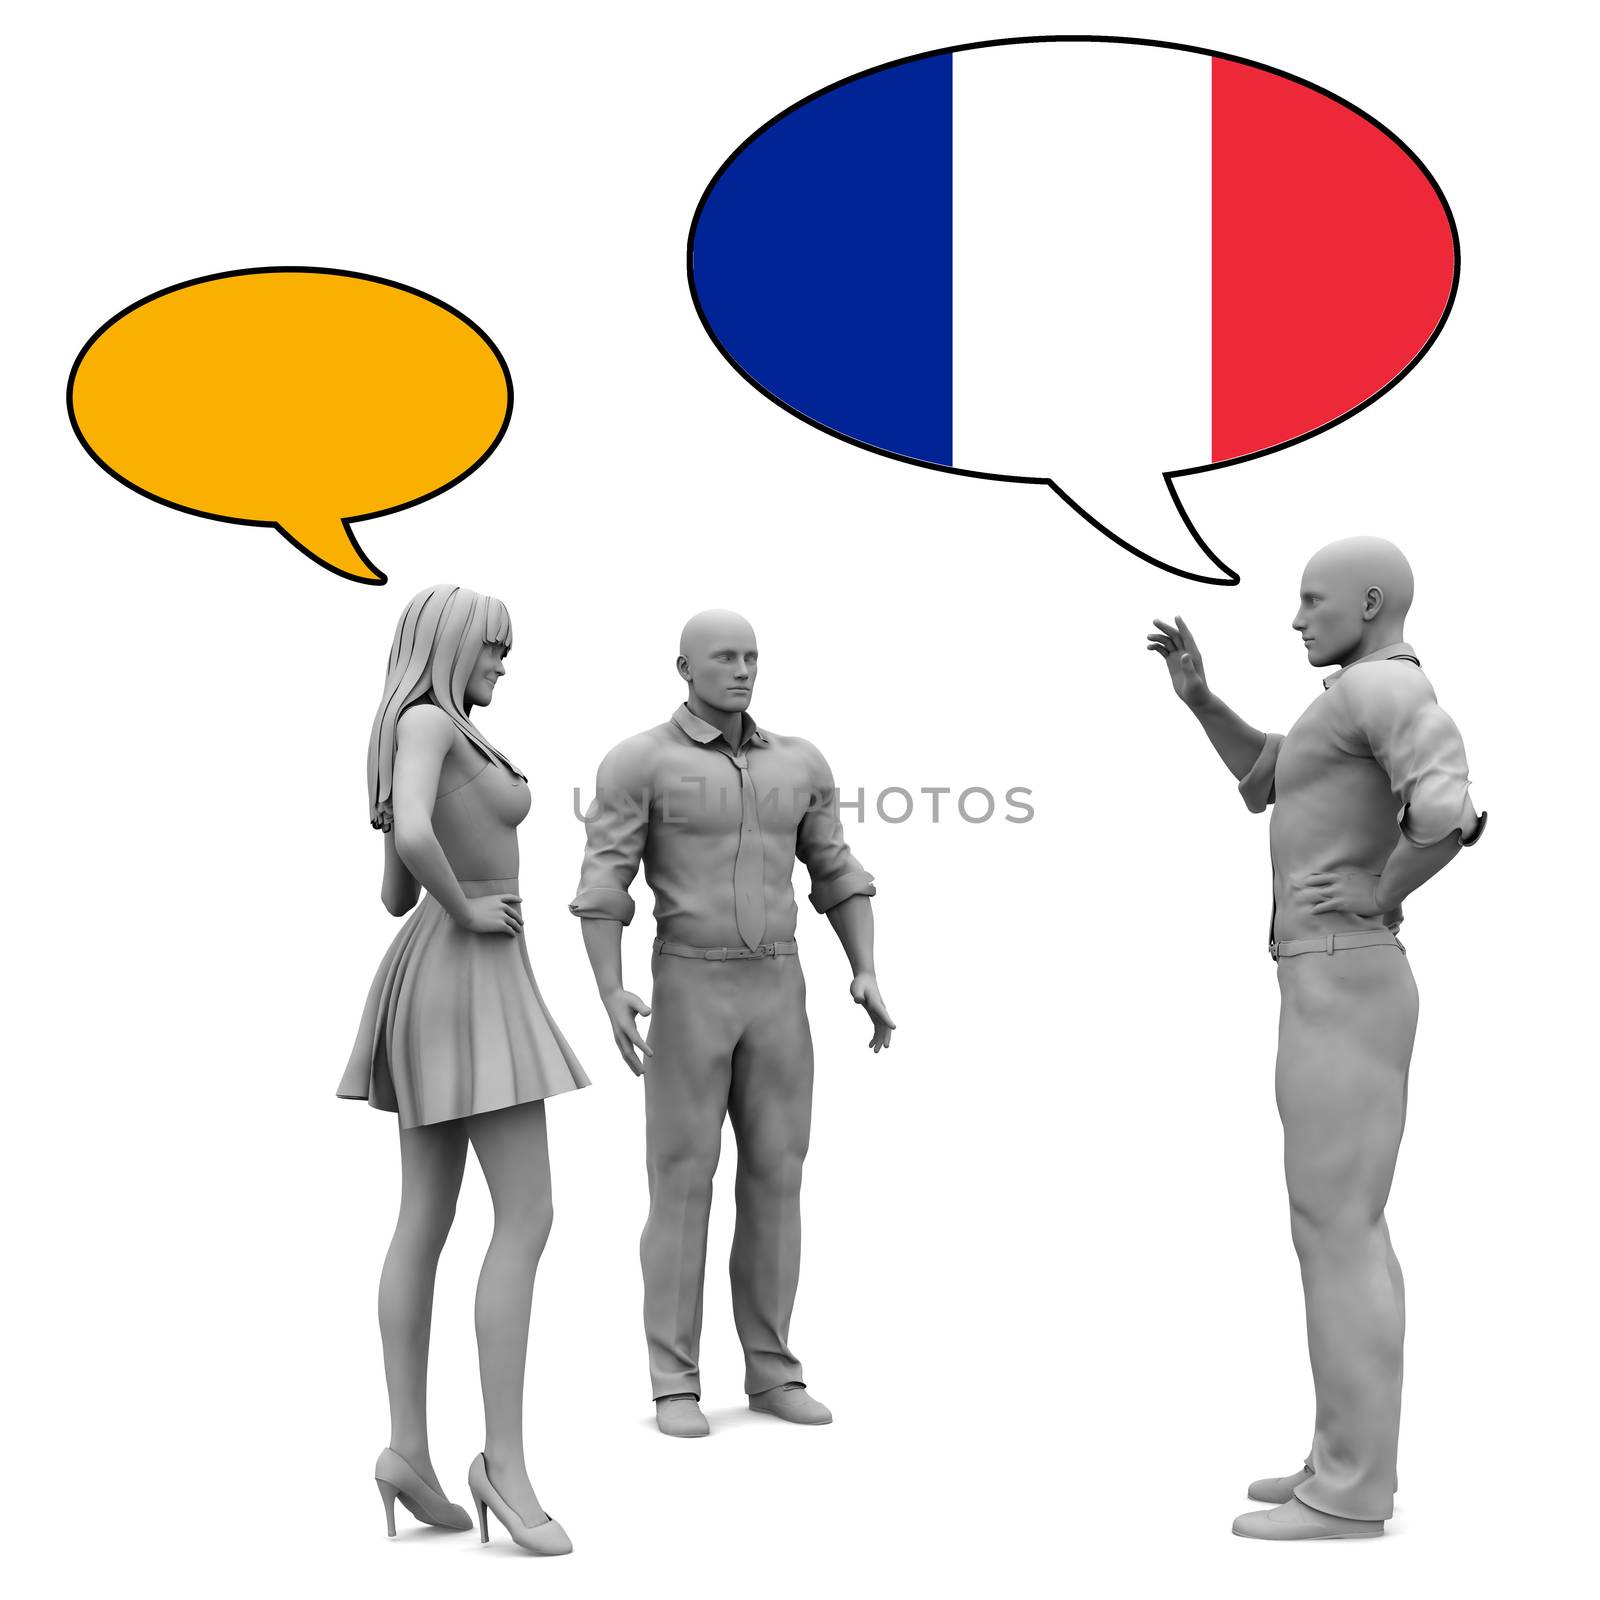 Learn French Culture and Language to Communicate